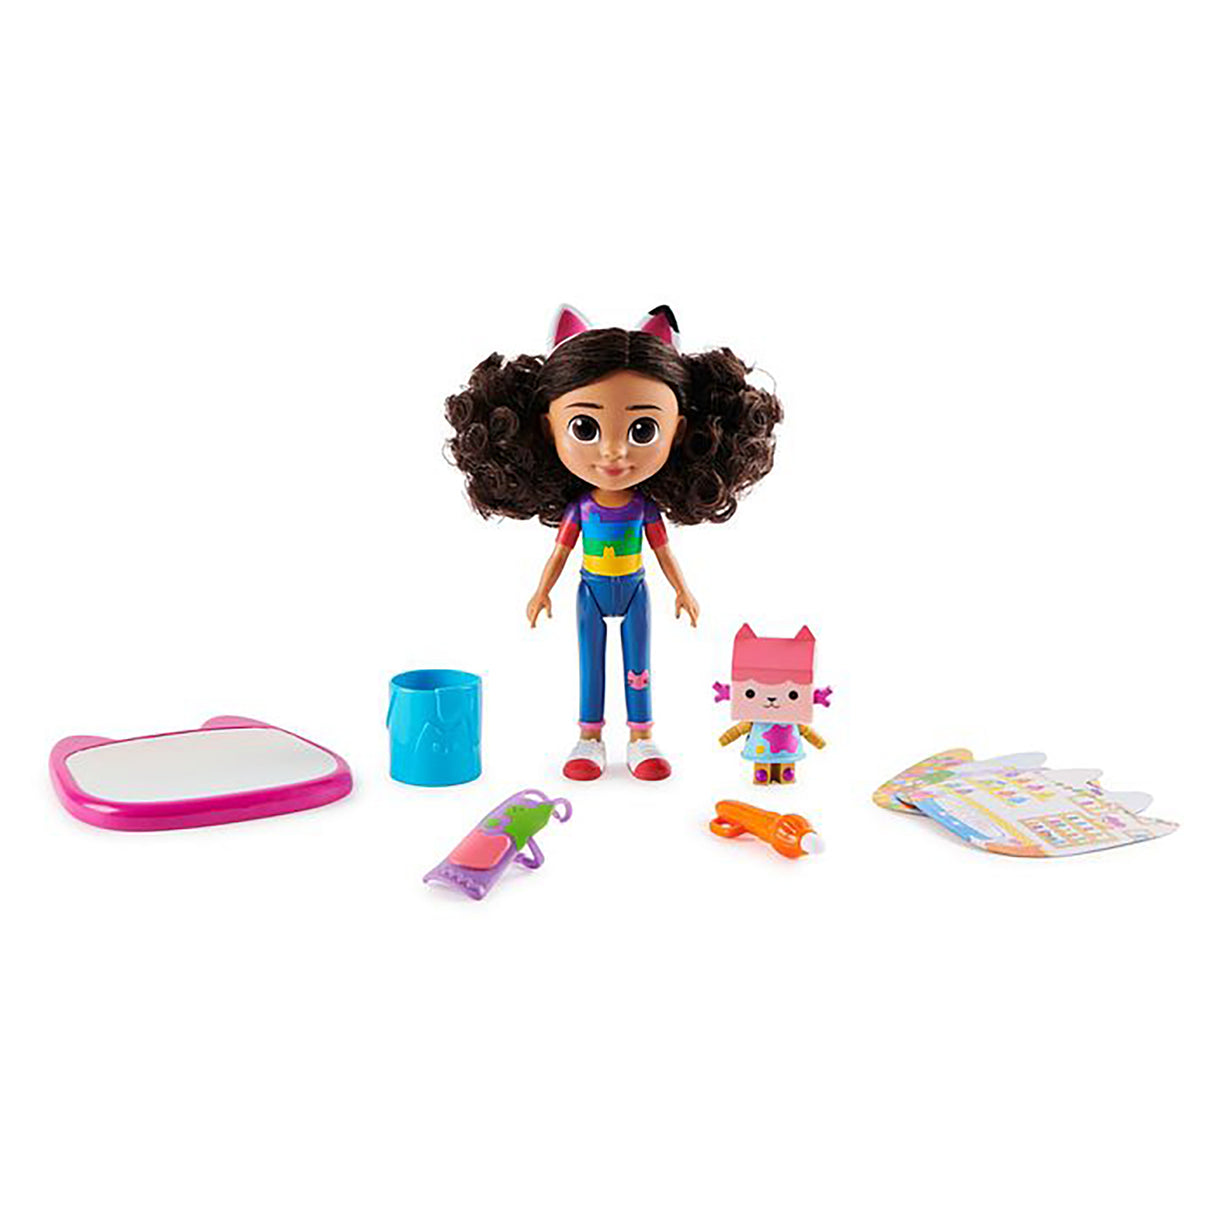 Gabby's Dollhouse Deluxe Craft Doll